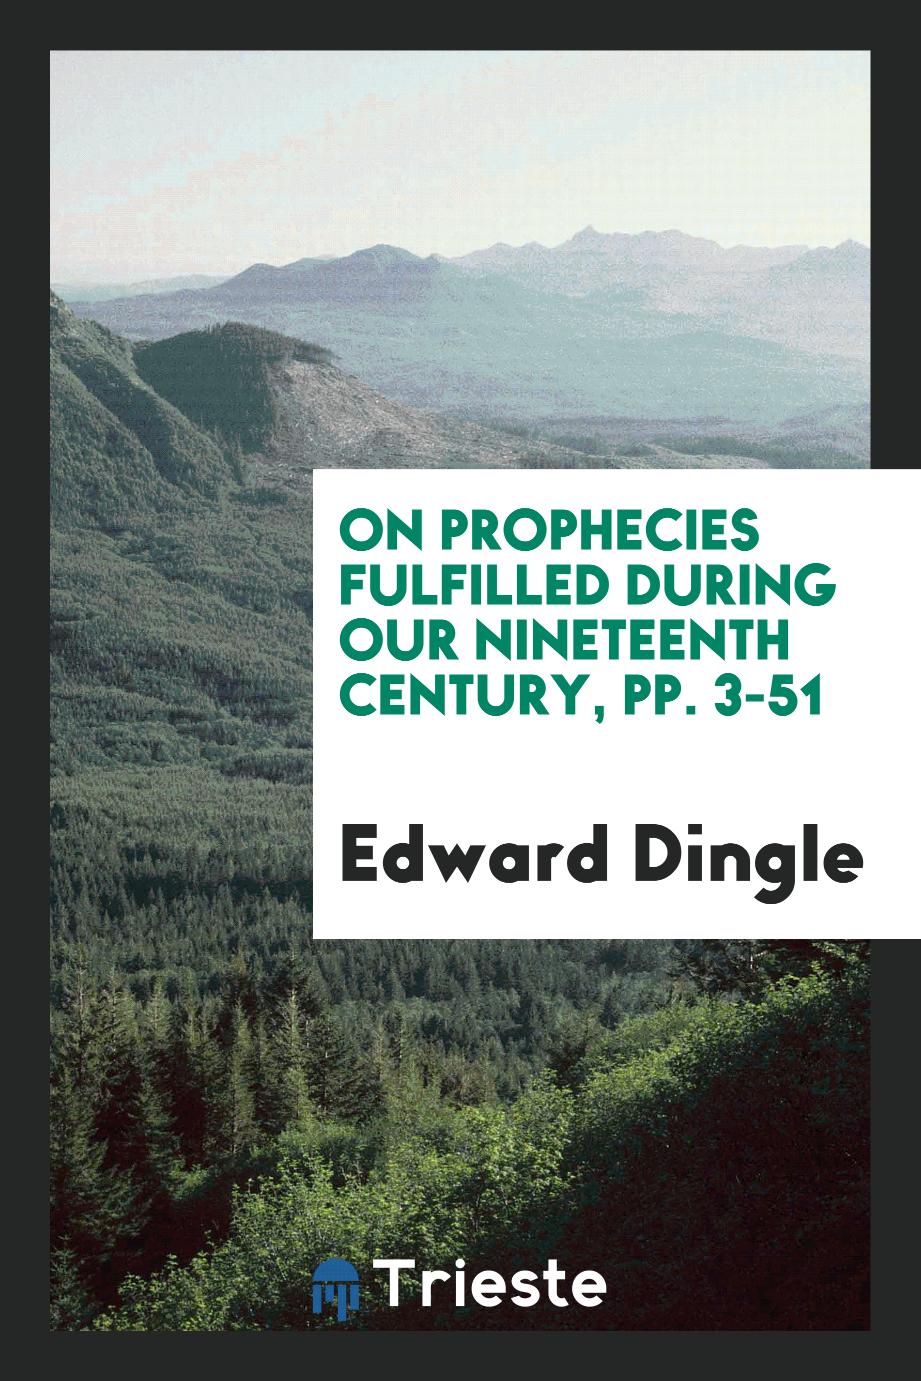 On Prophecies Fulfilled During Our Nineteenth Century, pp. 3-51